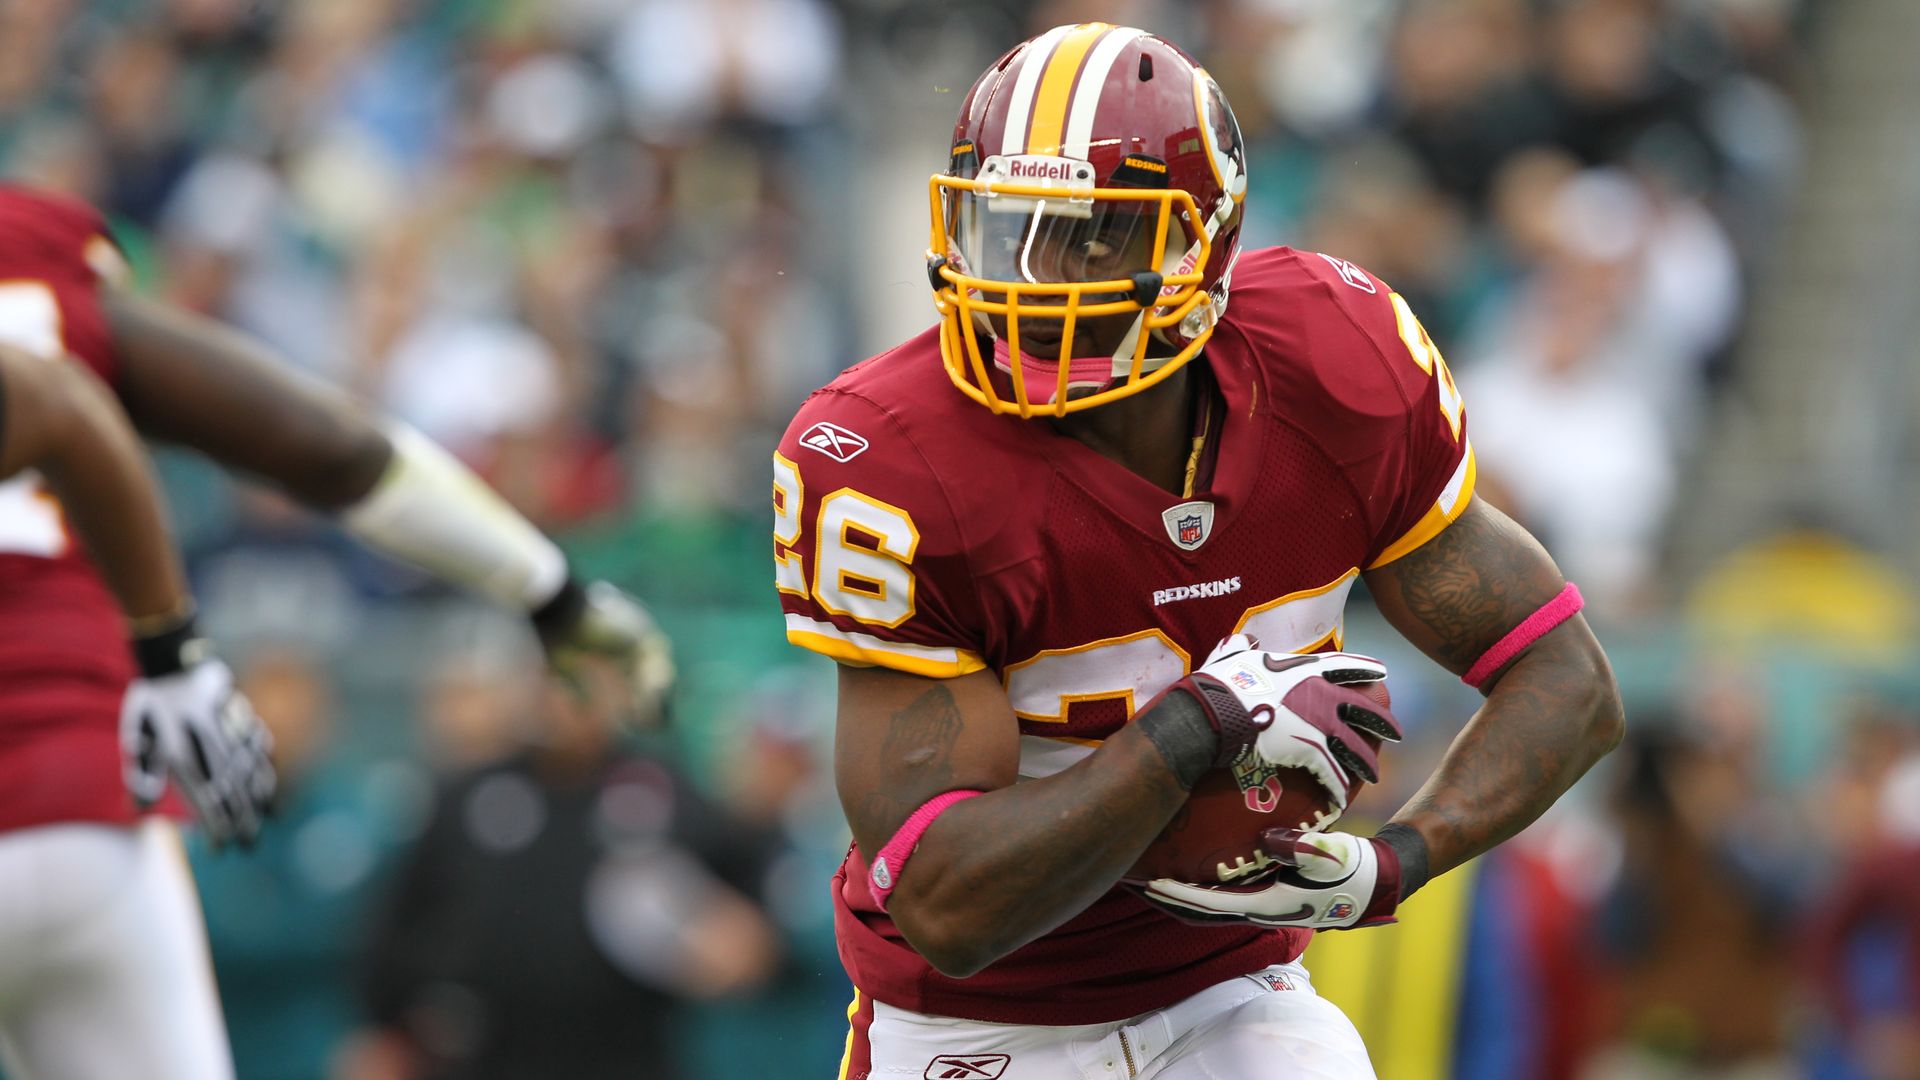 Running back Clinton Portis #26 of the Washington Redskins carries the ball during a game against the Philadelphia Eagles on October 3, 2010